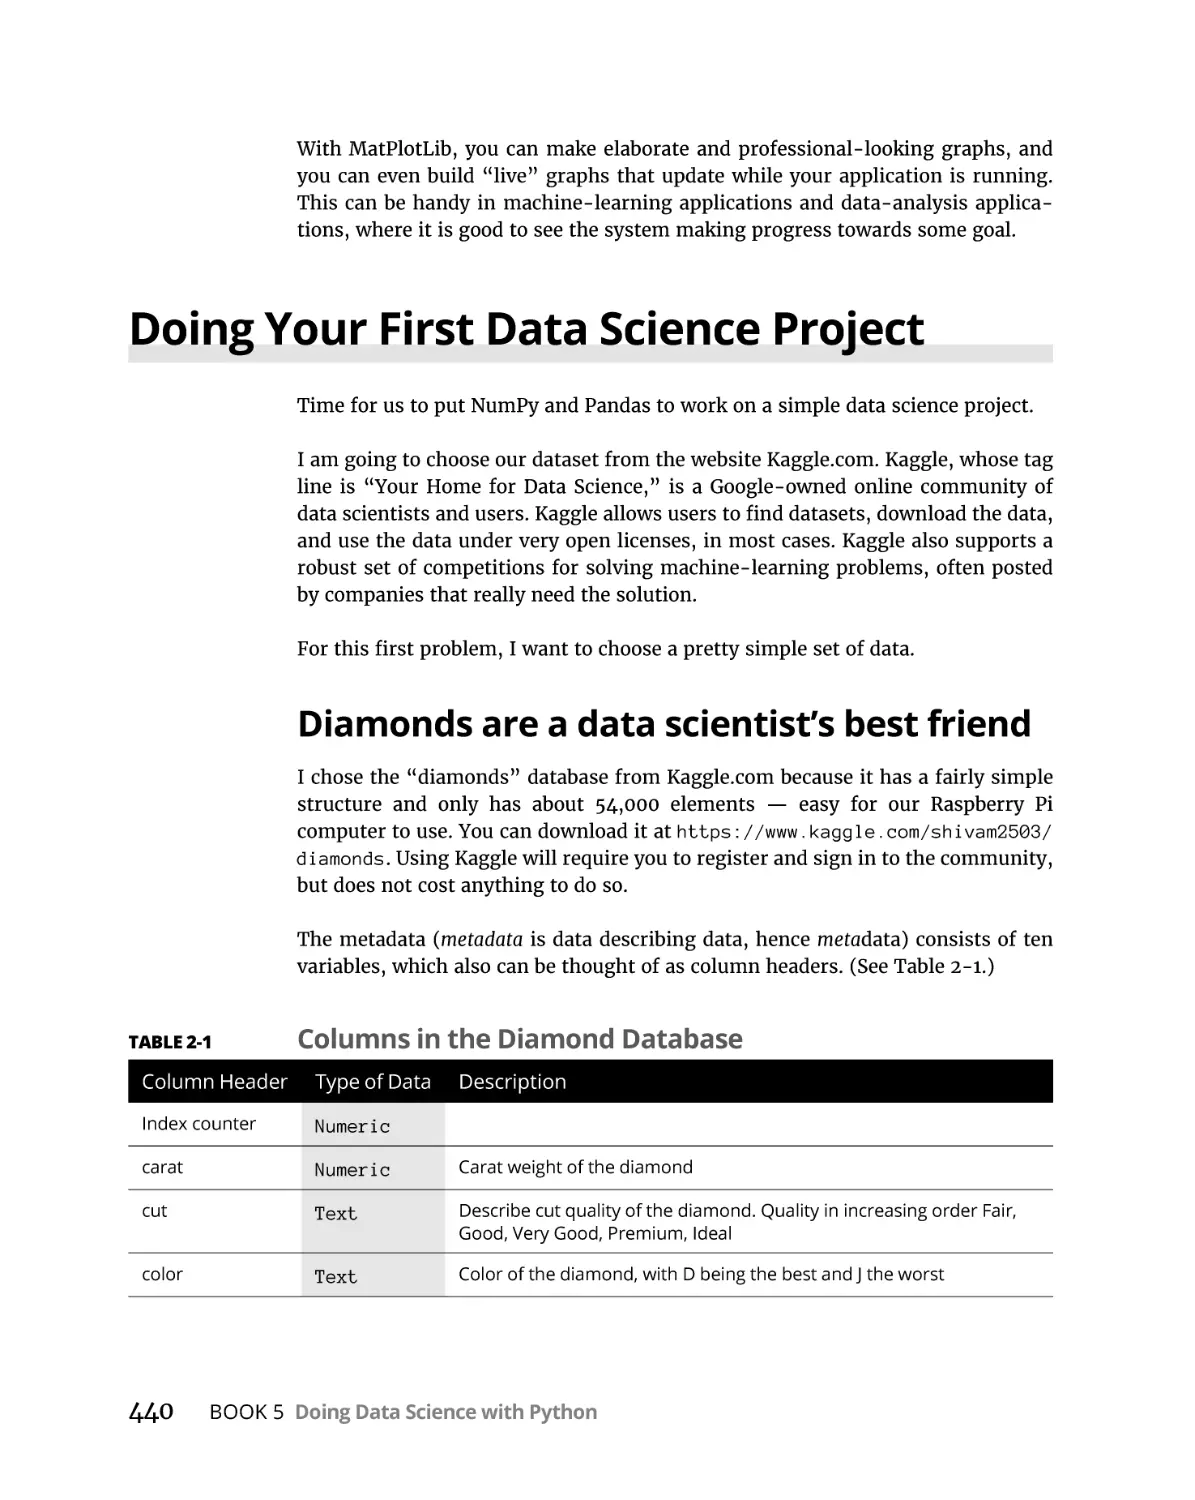 Doing Your First Data Science Project
Diamonds are a data scientist’s best friend